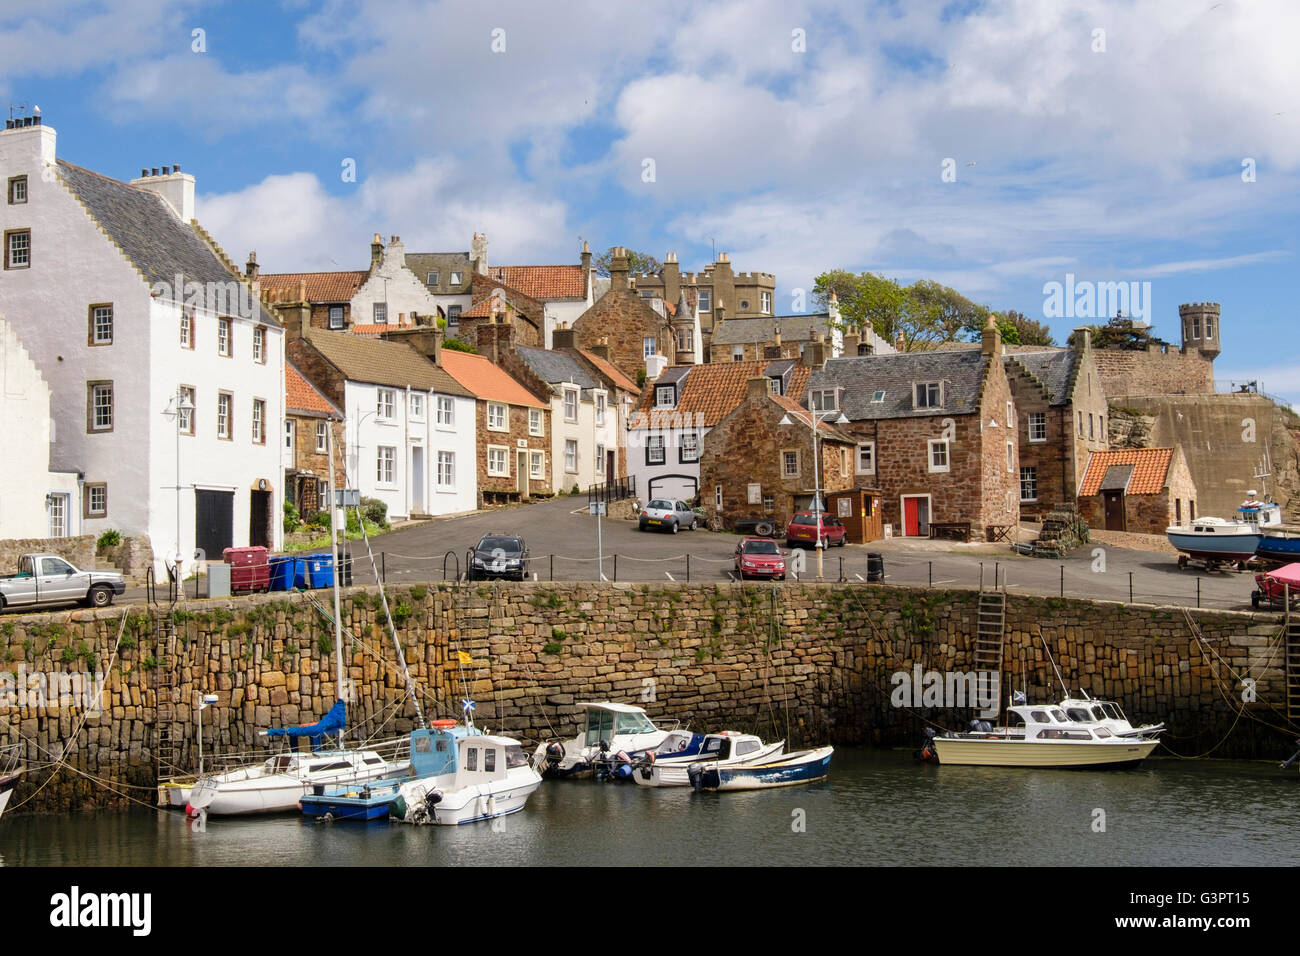 Old fishermen's cottages around harbour with moored fishing boats in old village on Firth of Forth coast. Crail, East Neuk of Fife, Fife, Scotland, UK Stock Photo